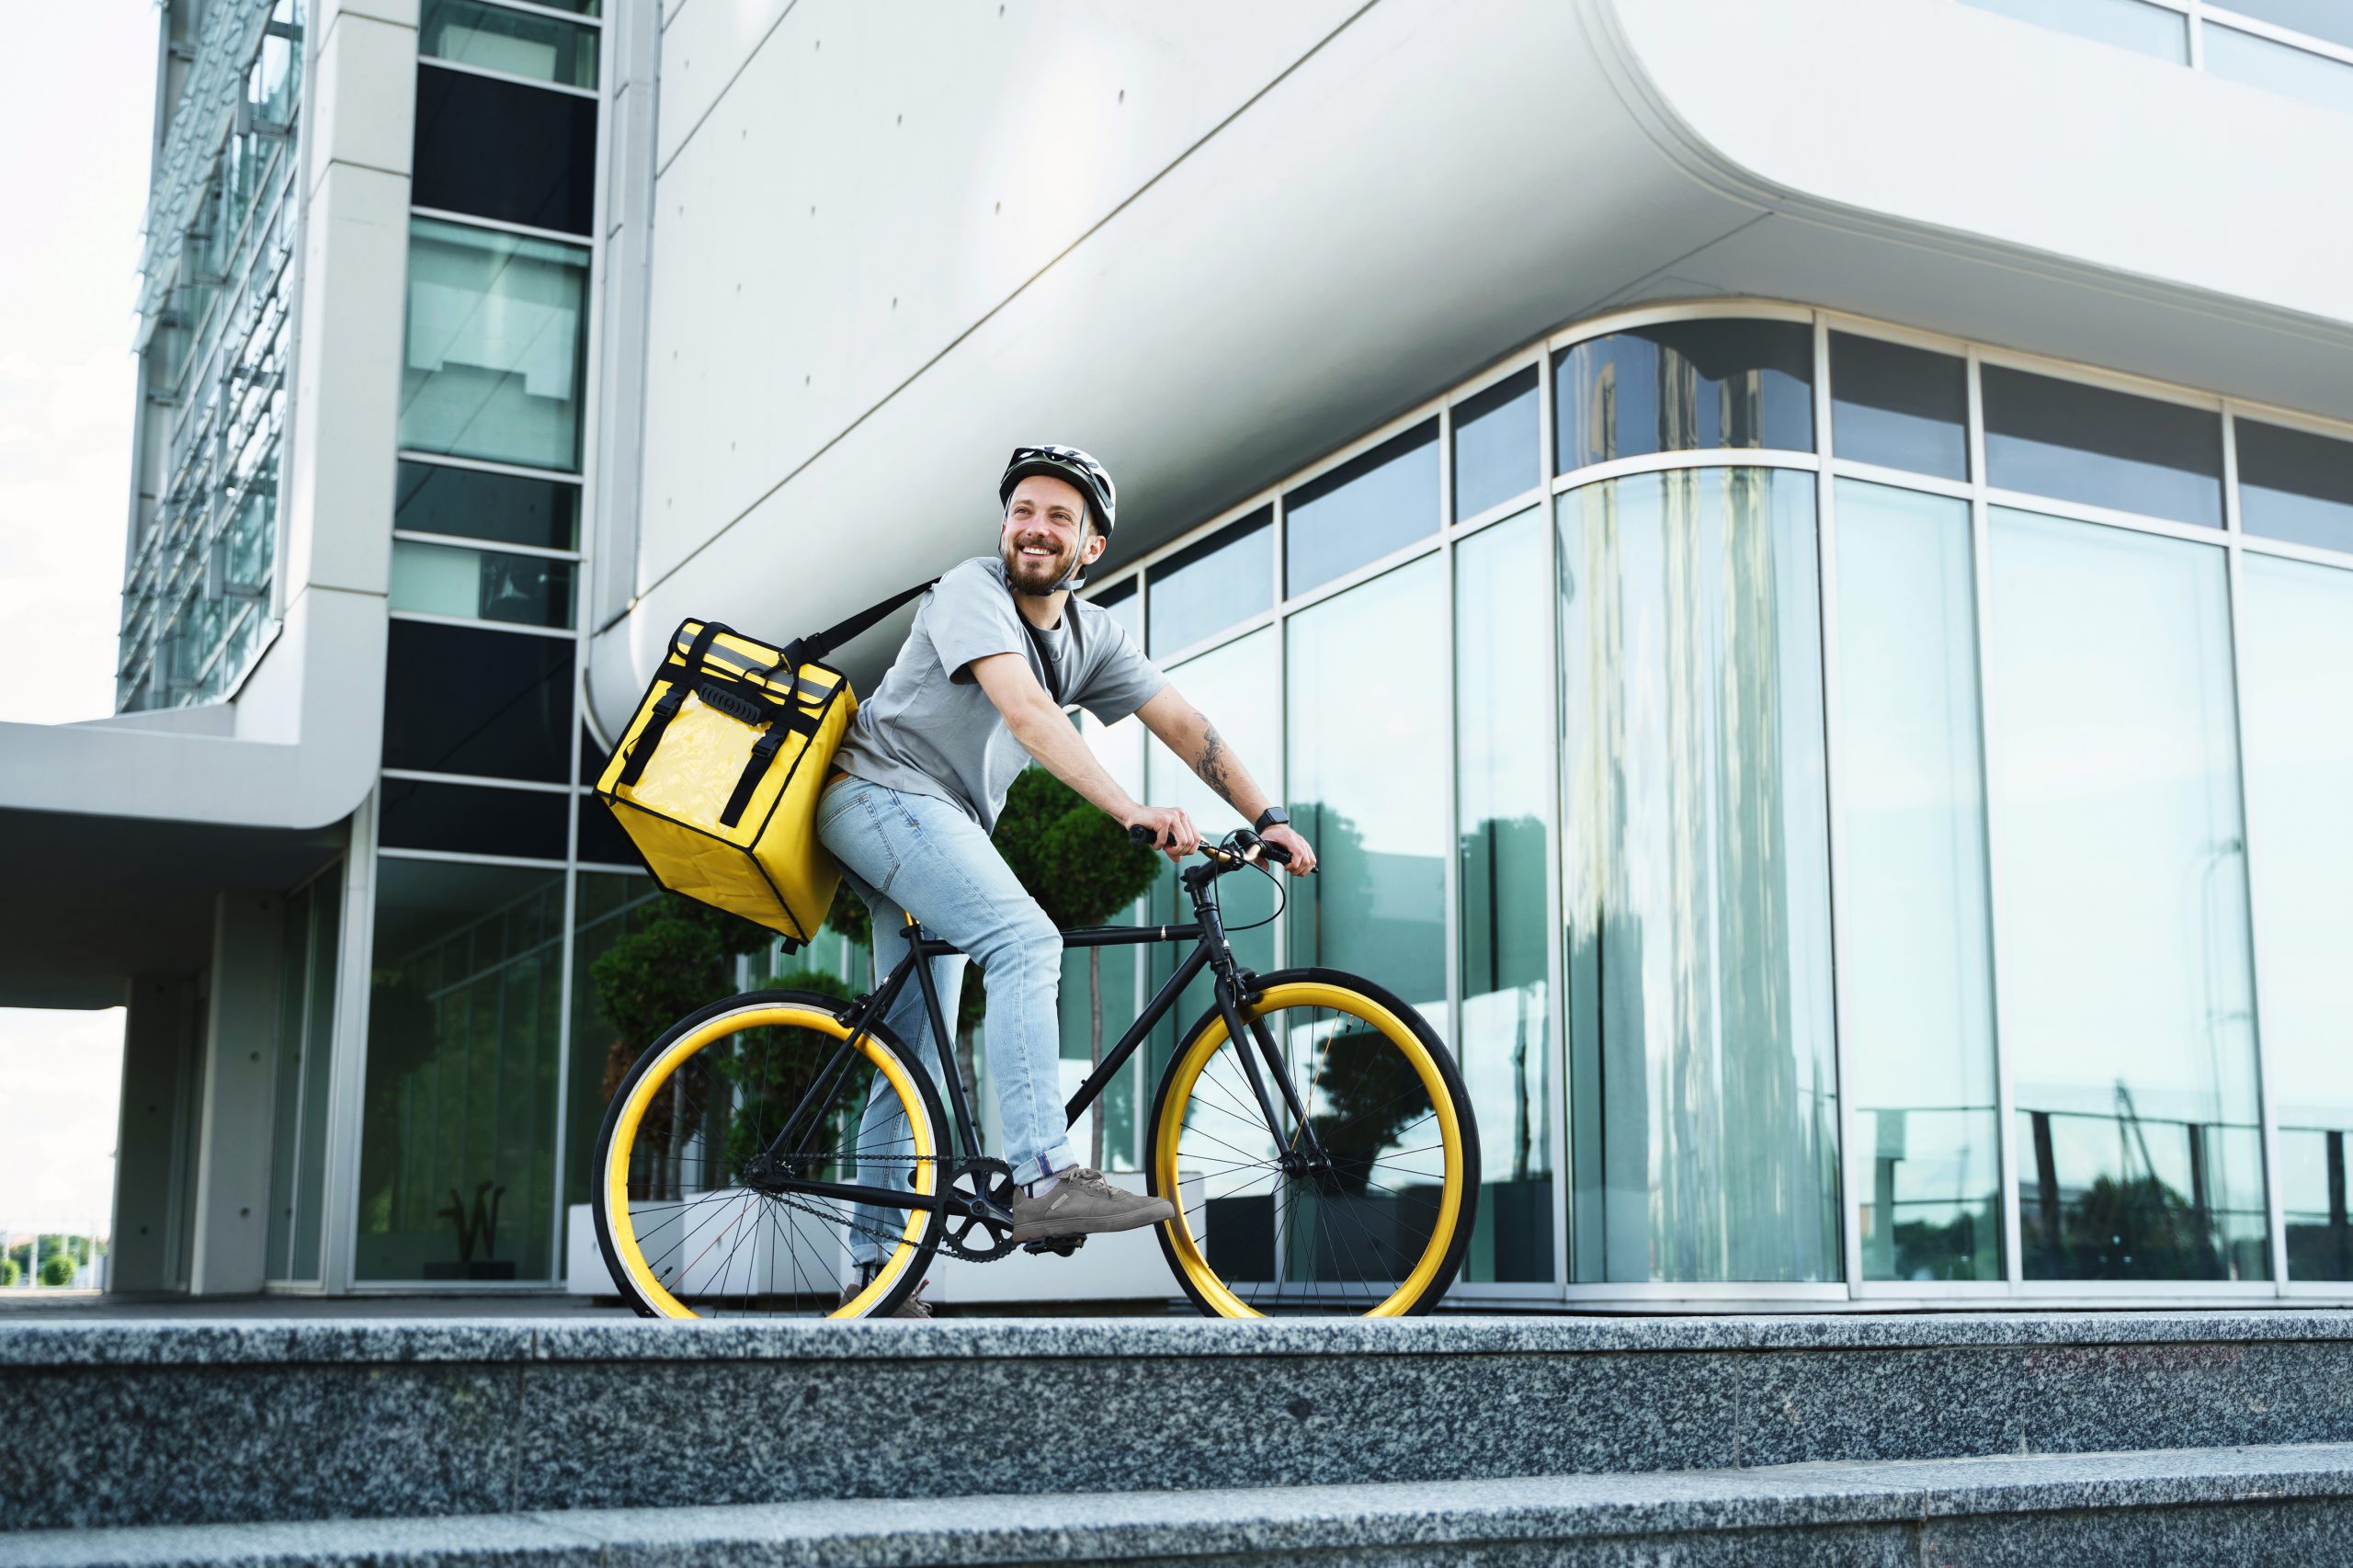 express-delivery-courier-standing-bicycle-with-insulated-bag